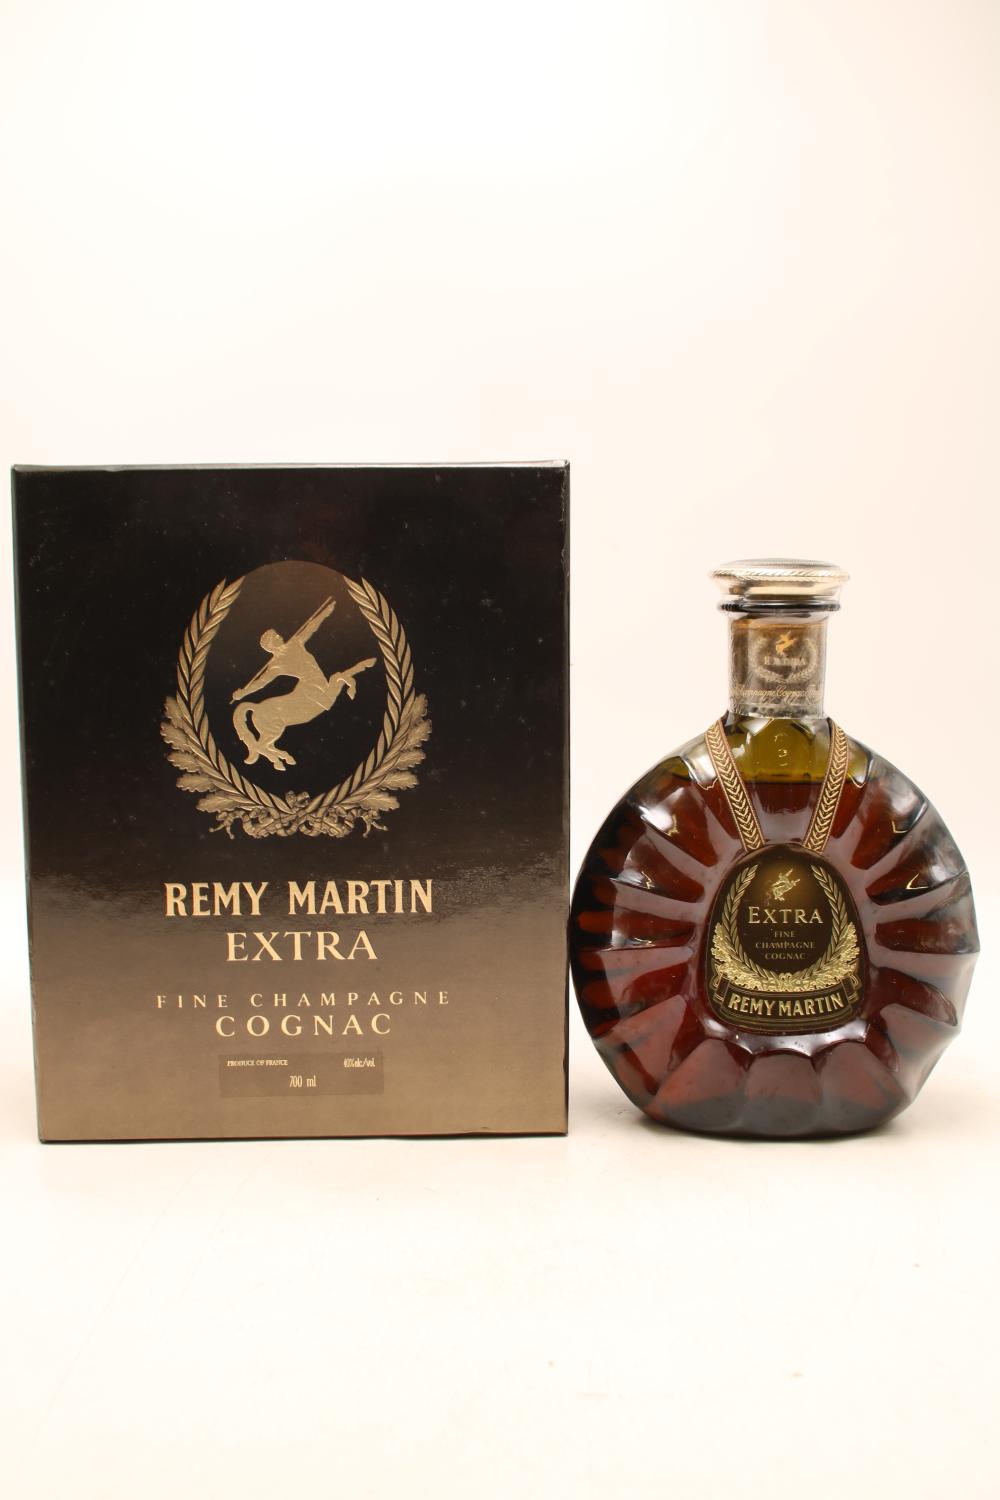 Remy Martin Extra Fine Champagne Cognac, France